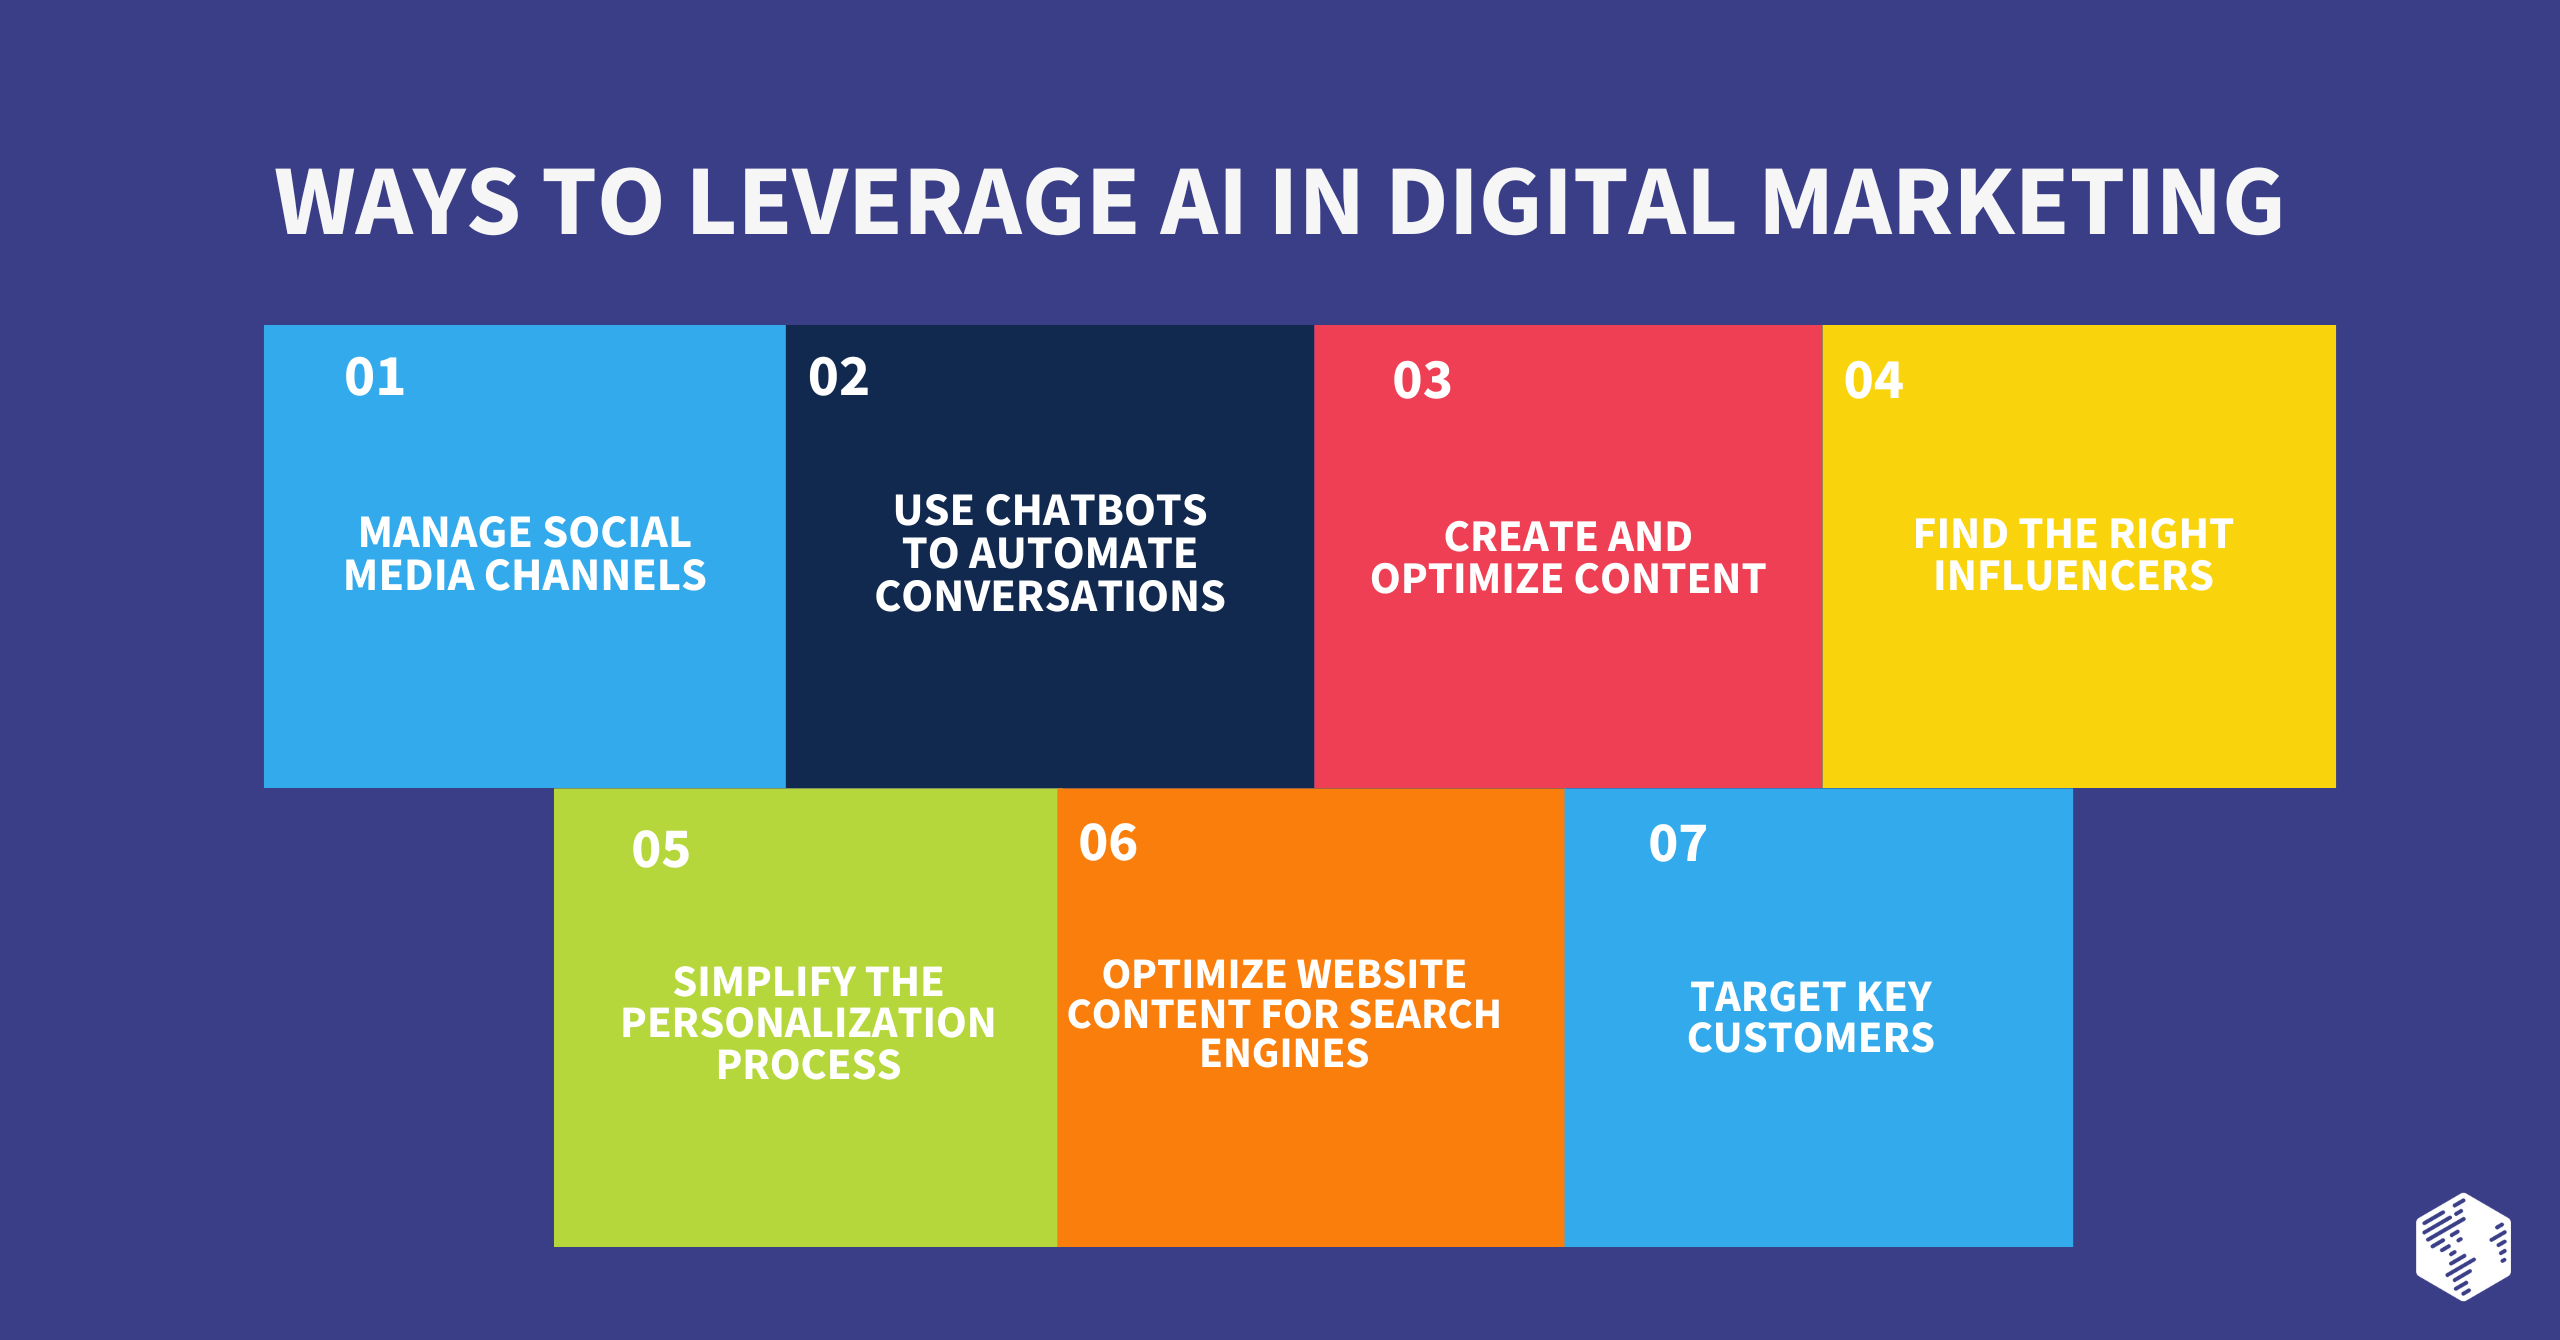 How to leverage AI in Digital Marketing